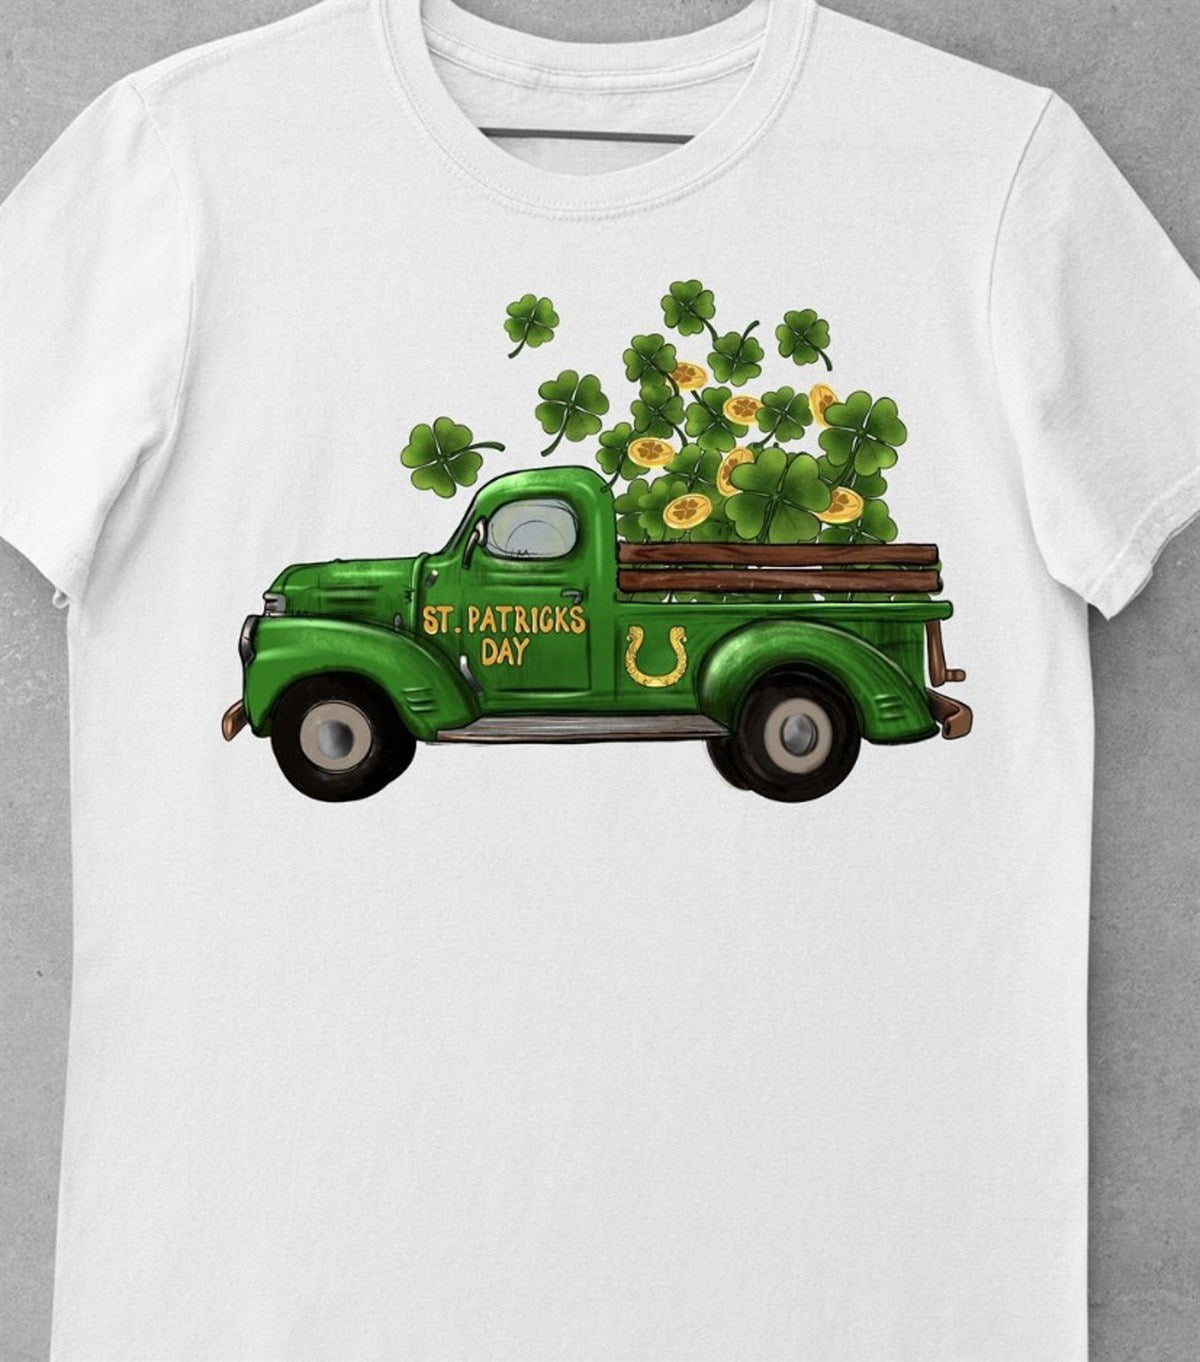 St. Patrick's Day Truck With Clovers Tee